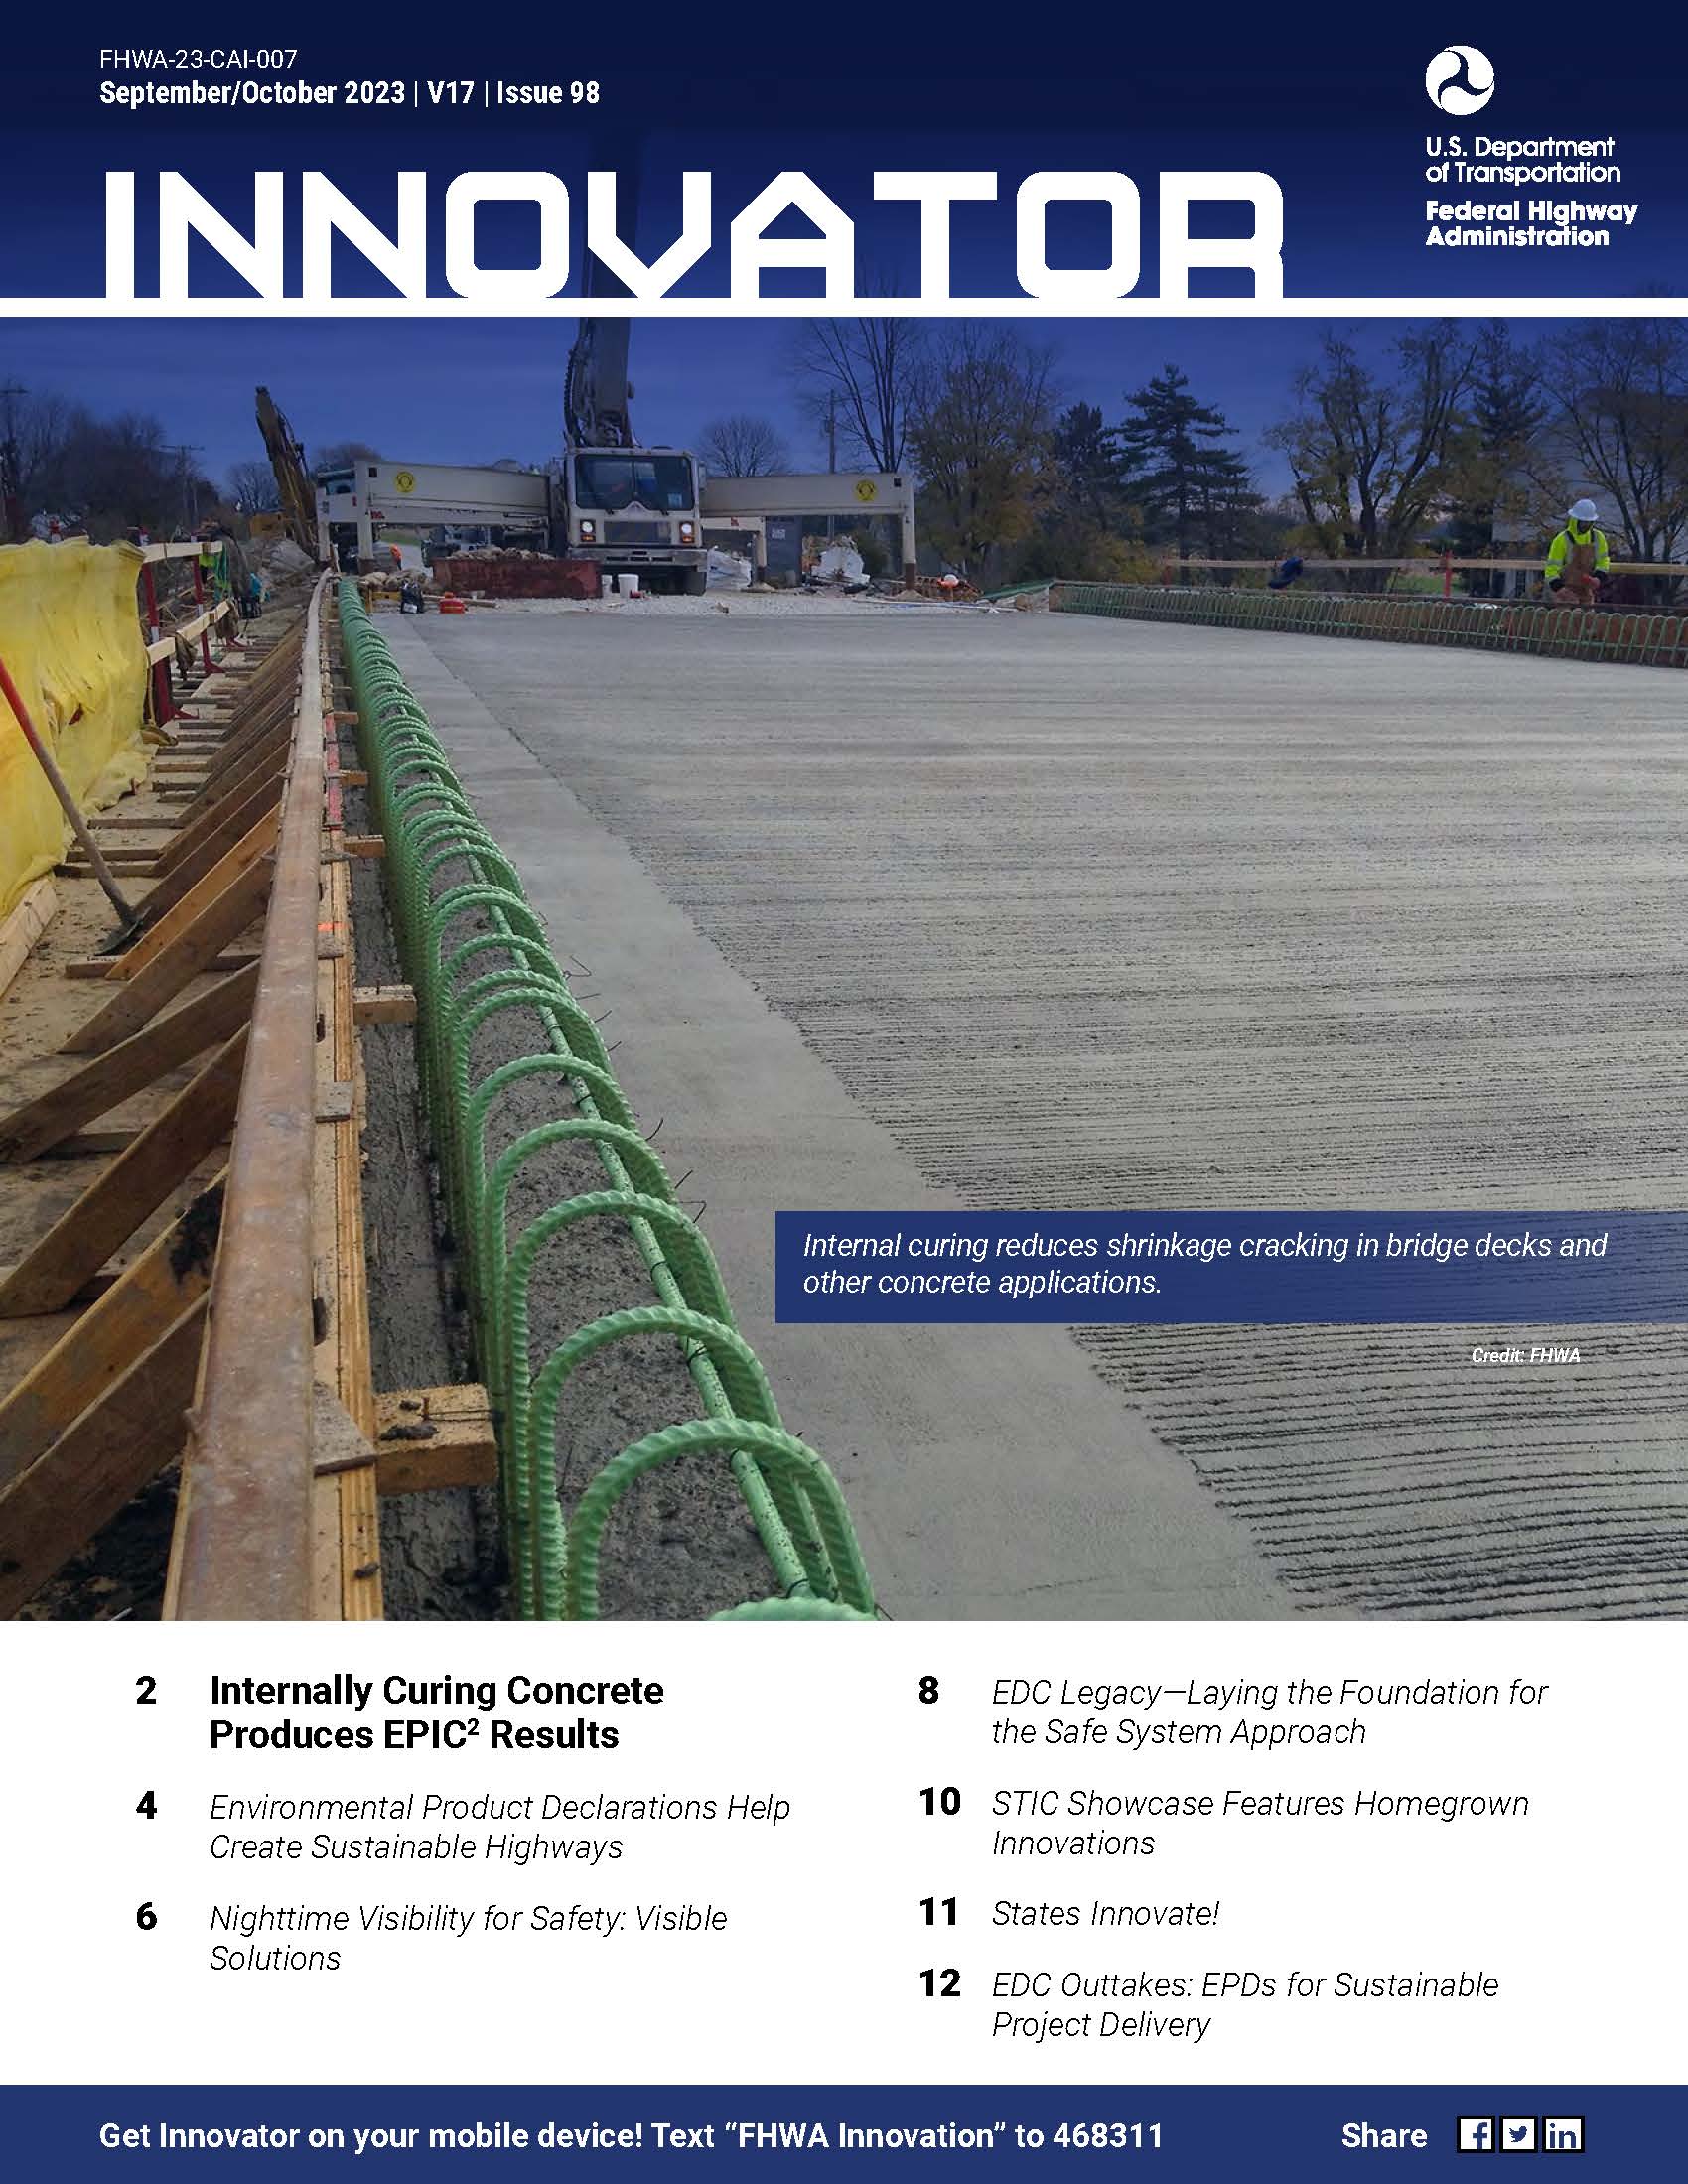 Cover image - Innovator Issue 98. Freshly poured bridge deck that uses Internally Cured Concrete.